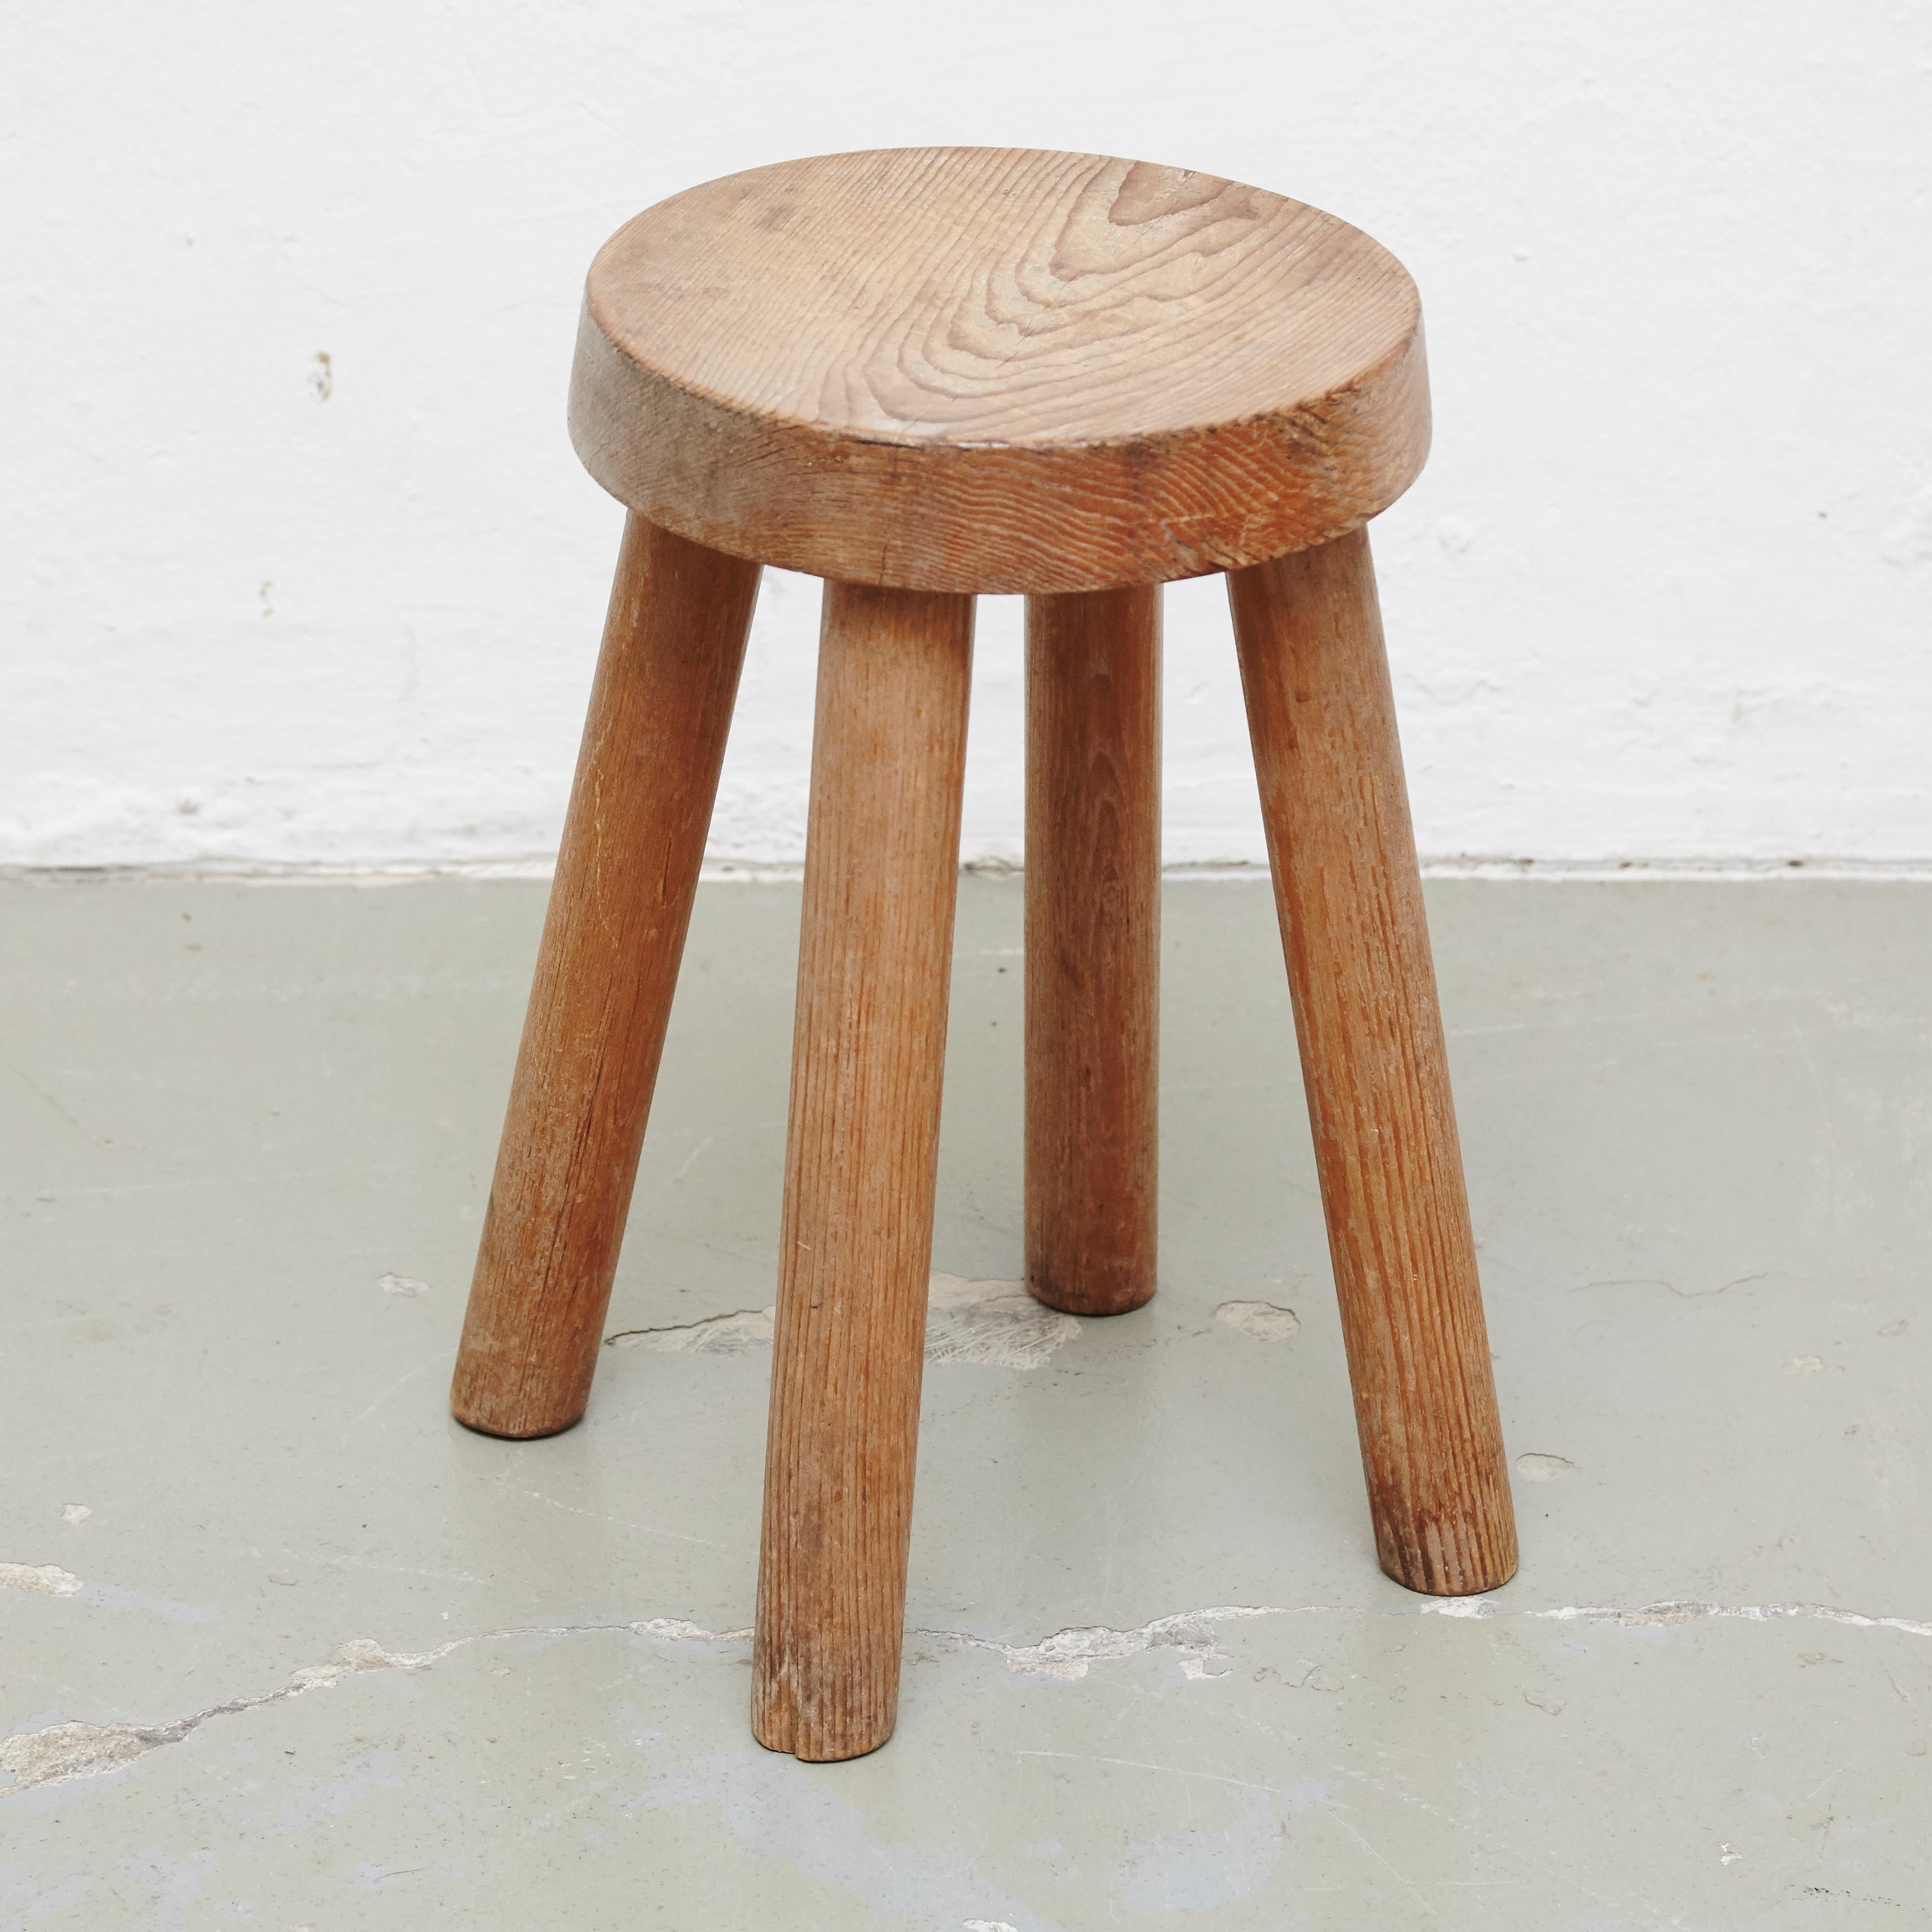 Stool designed by Charlotte Perriand, circa 1960 for Les Arcs.
Manufactured in France.

In original condition, with wear consistent of age and use, preserving a beautiful patina. 

Charlotte Perriand (1903-1999) She was born in Paris in 1903